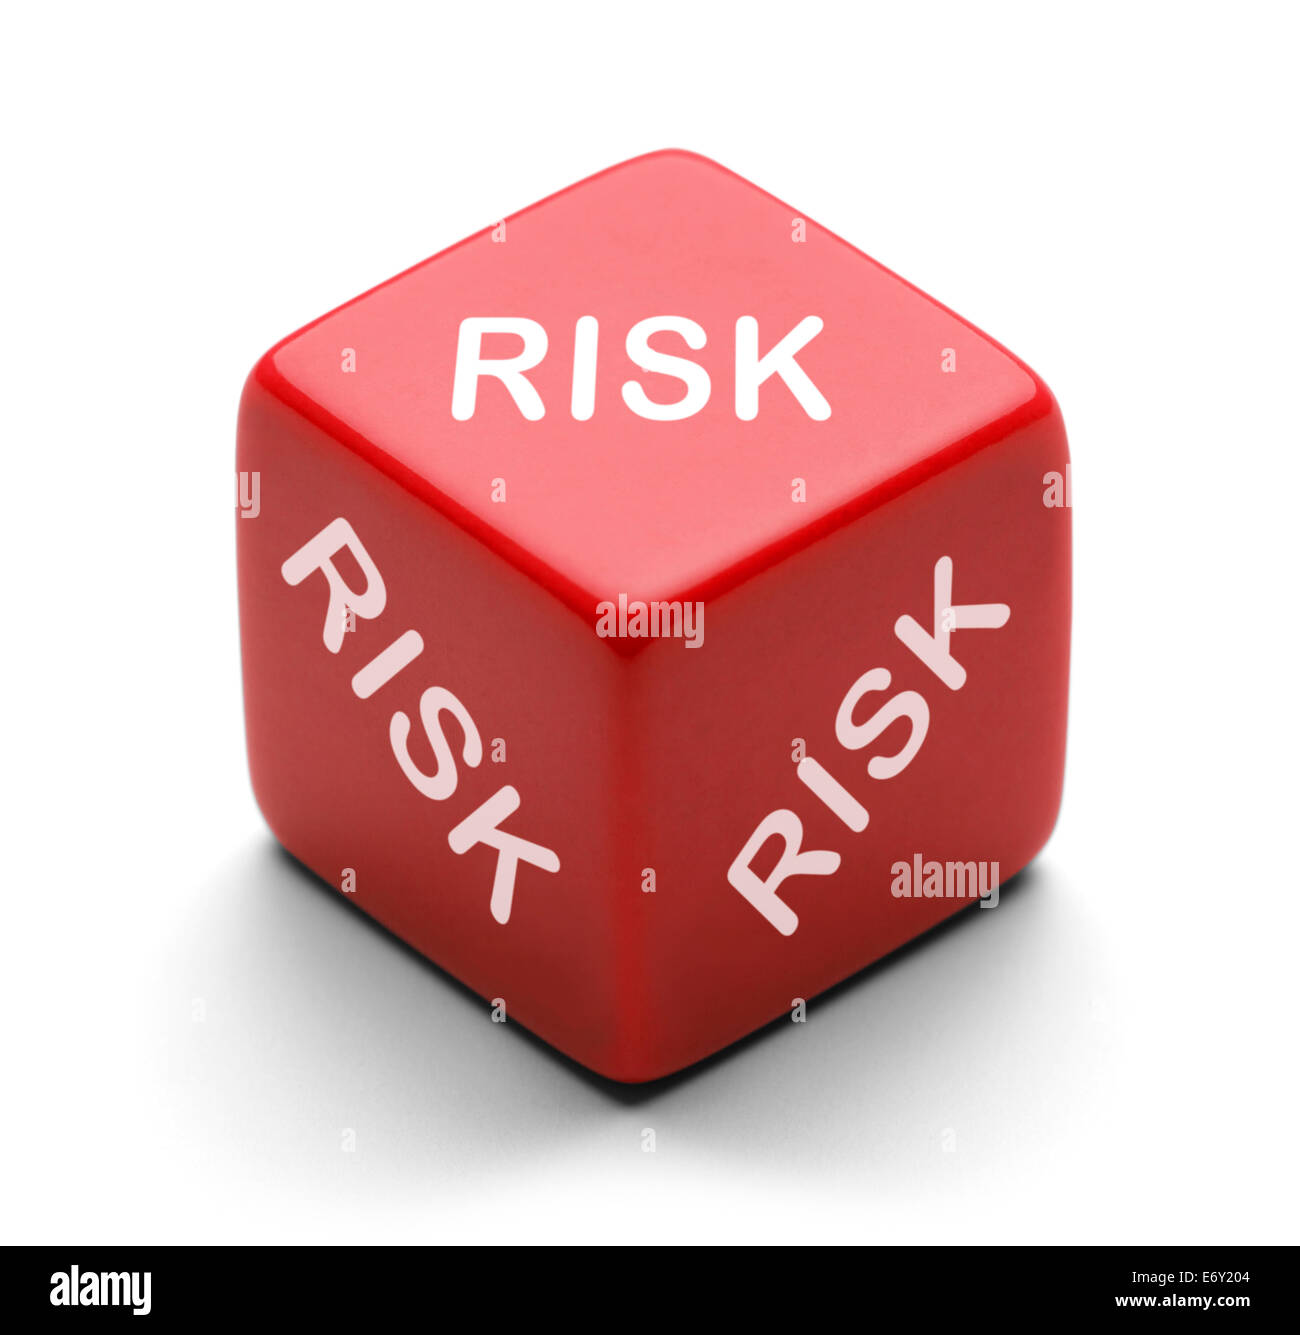 Red Dice with Risk on it Isolated on white background. Stock Photo